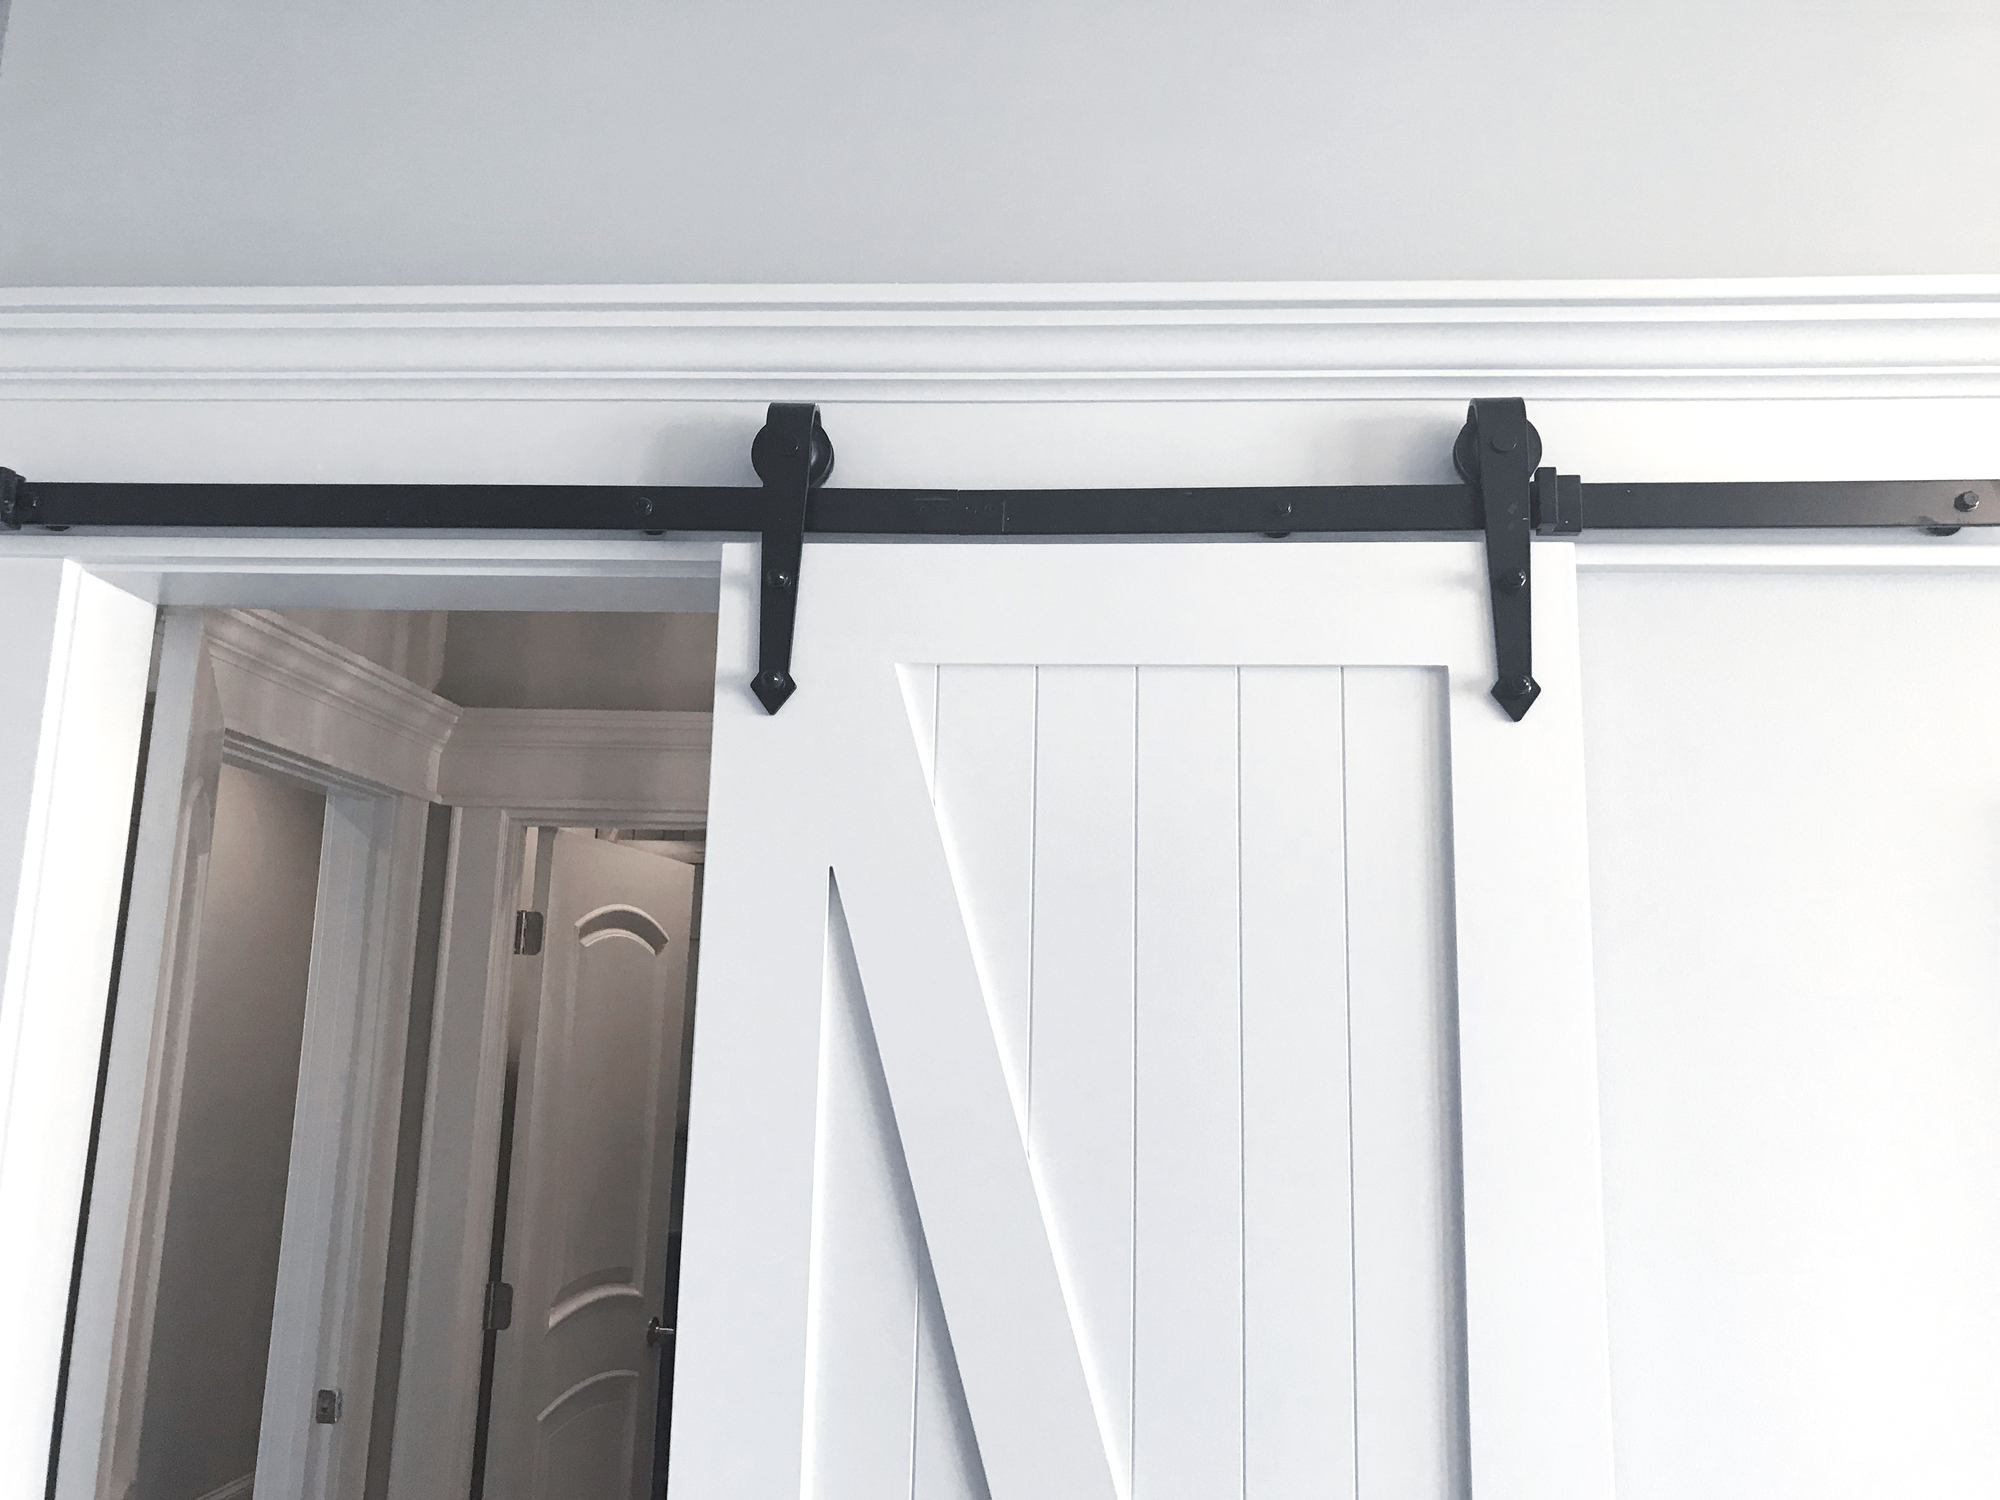 A sliding barn door with a black track system partially open, revealing an interior room